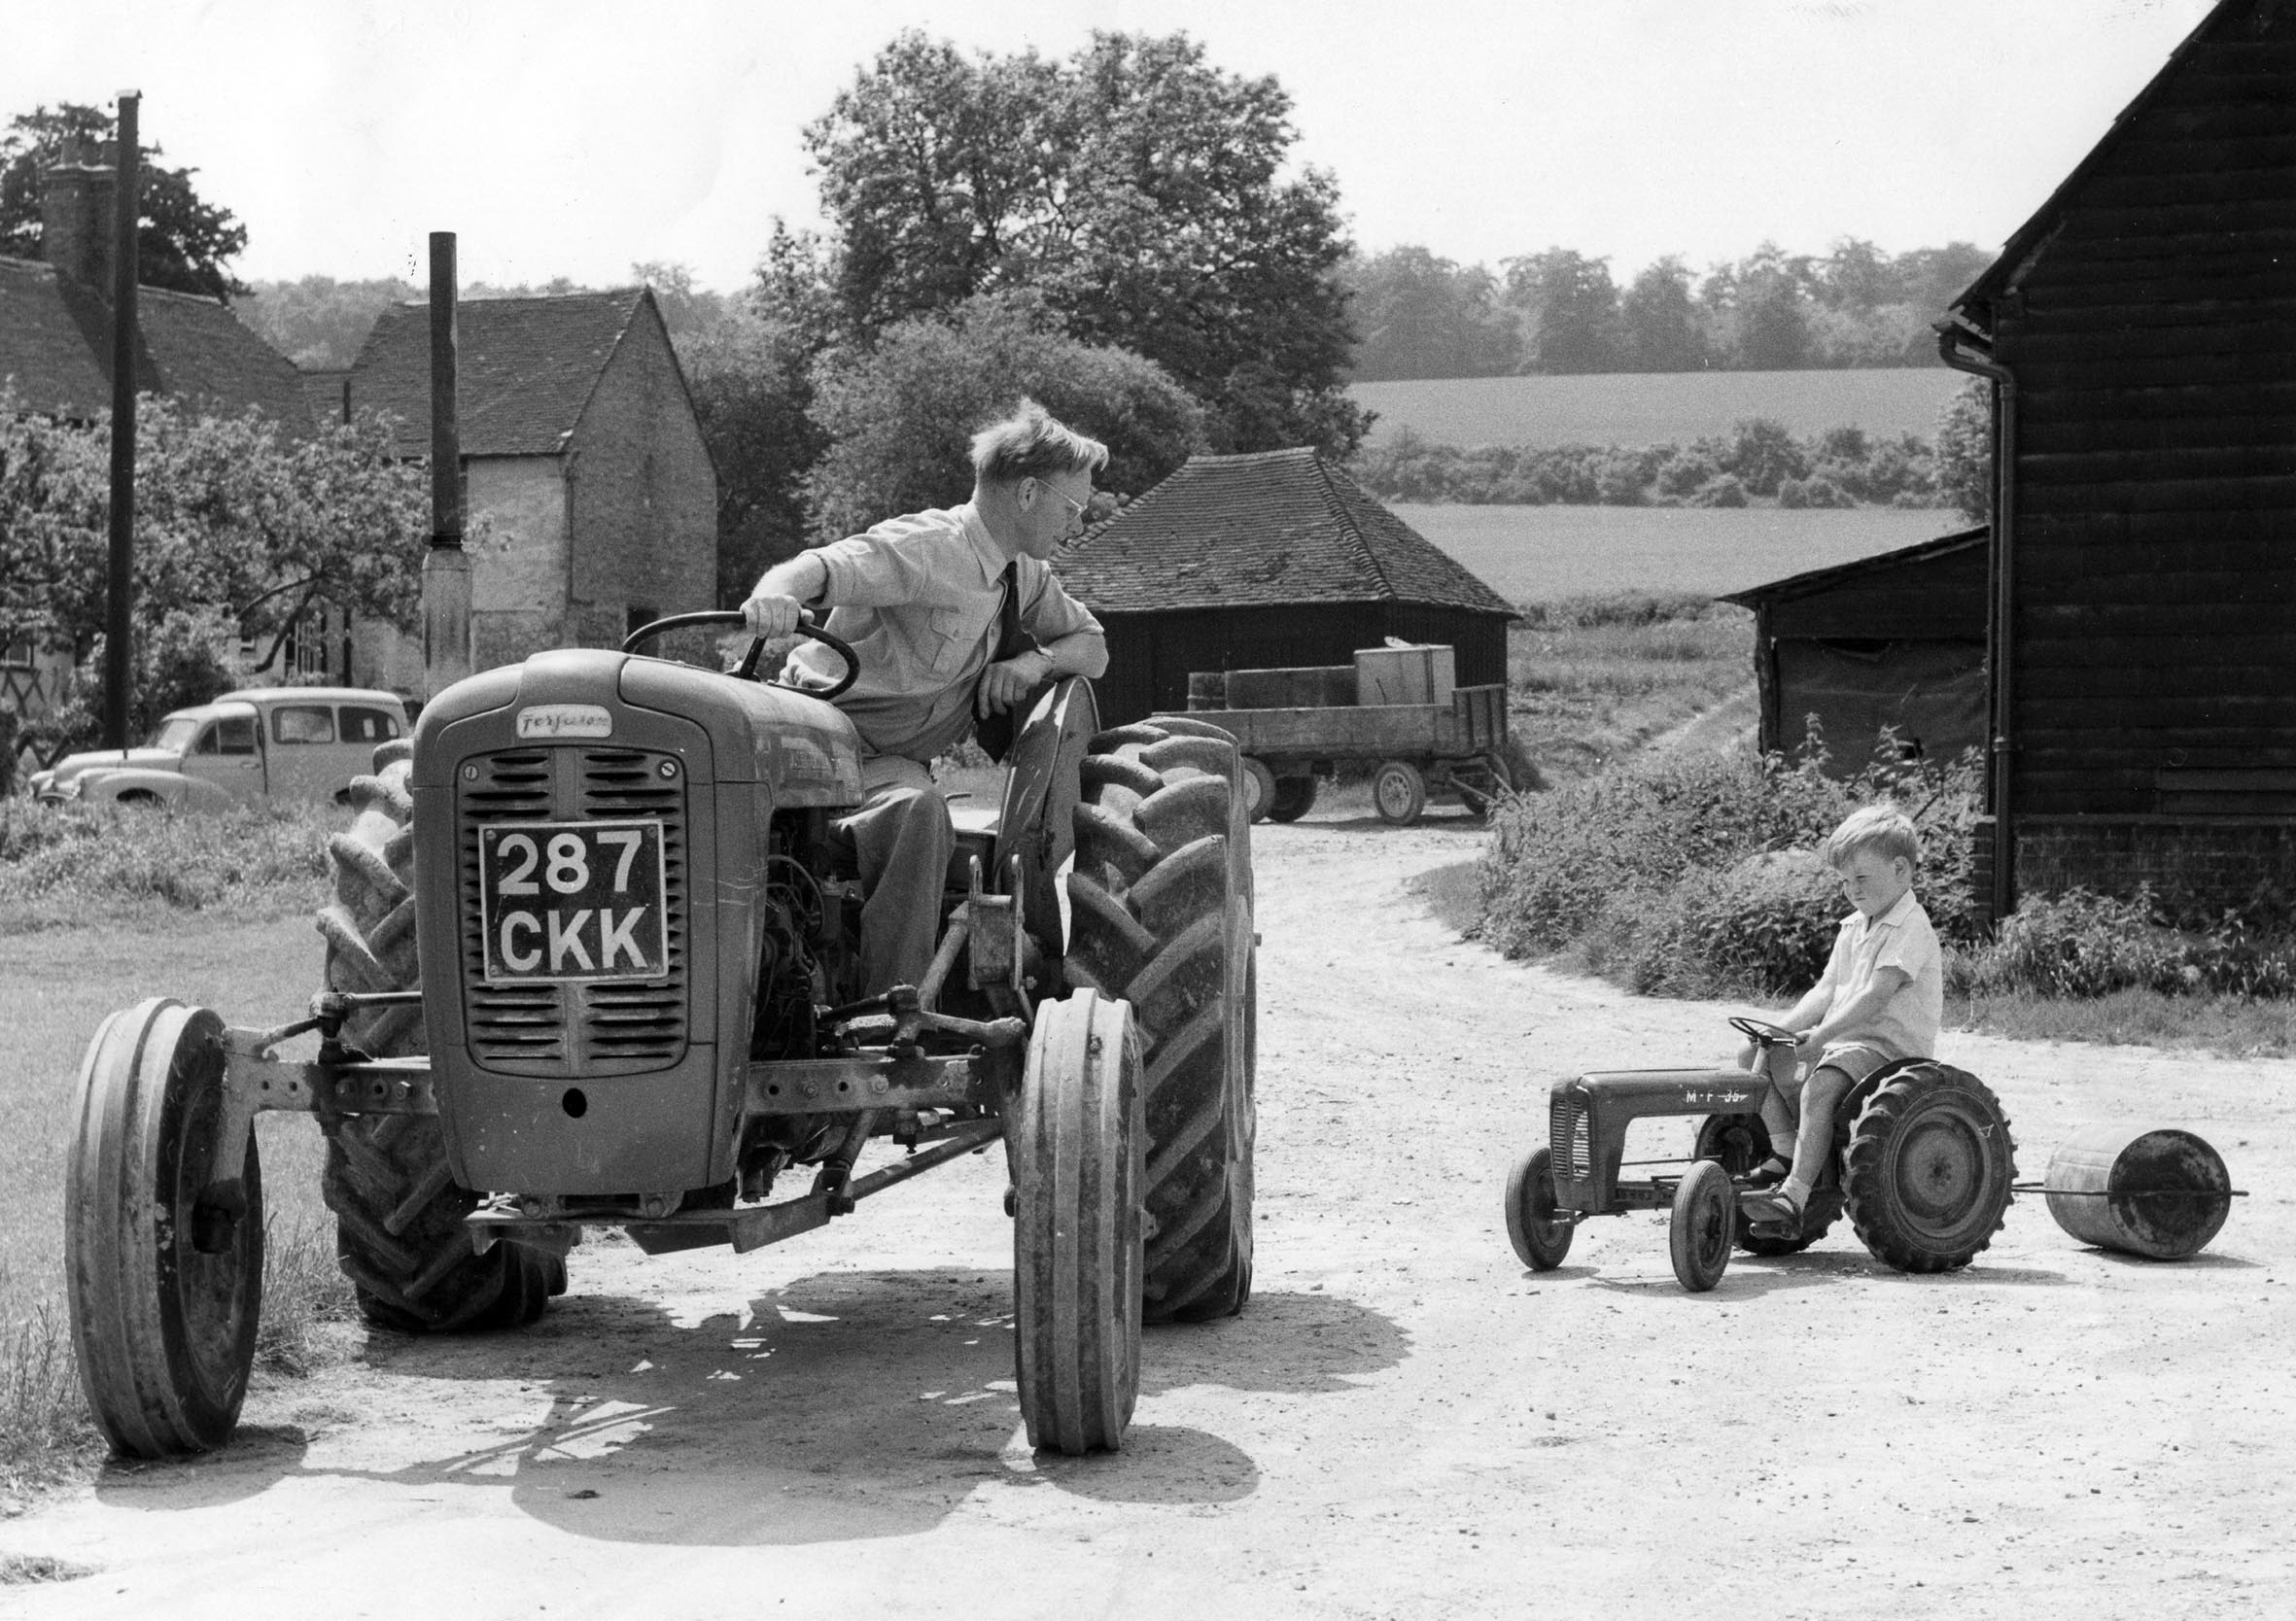 Man sitting on a tractor looks down to boy sitting on pedal tractor, with farmyard and countryside in the background